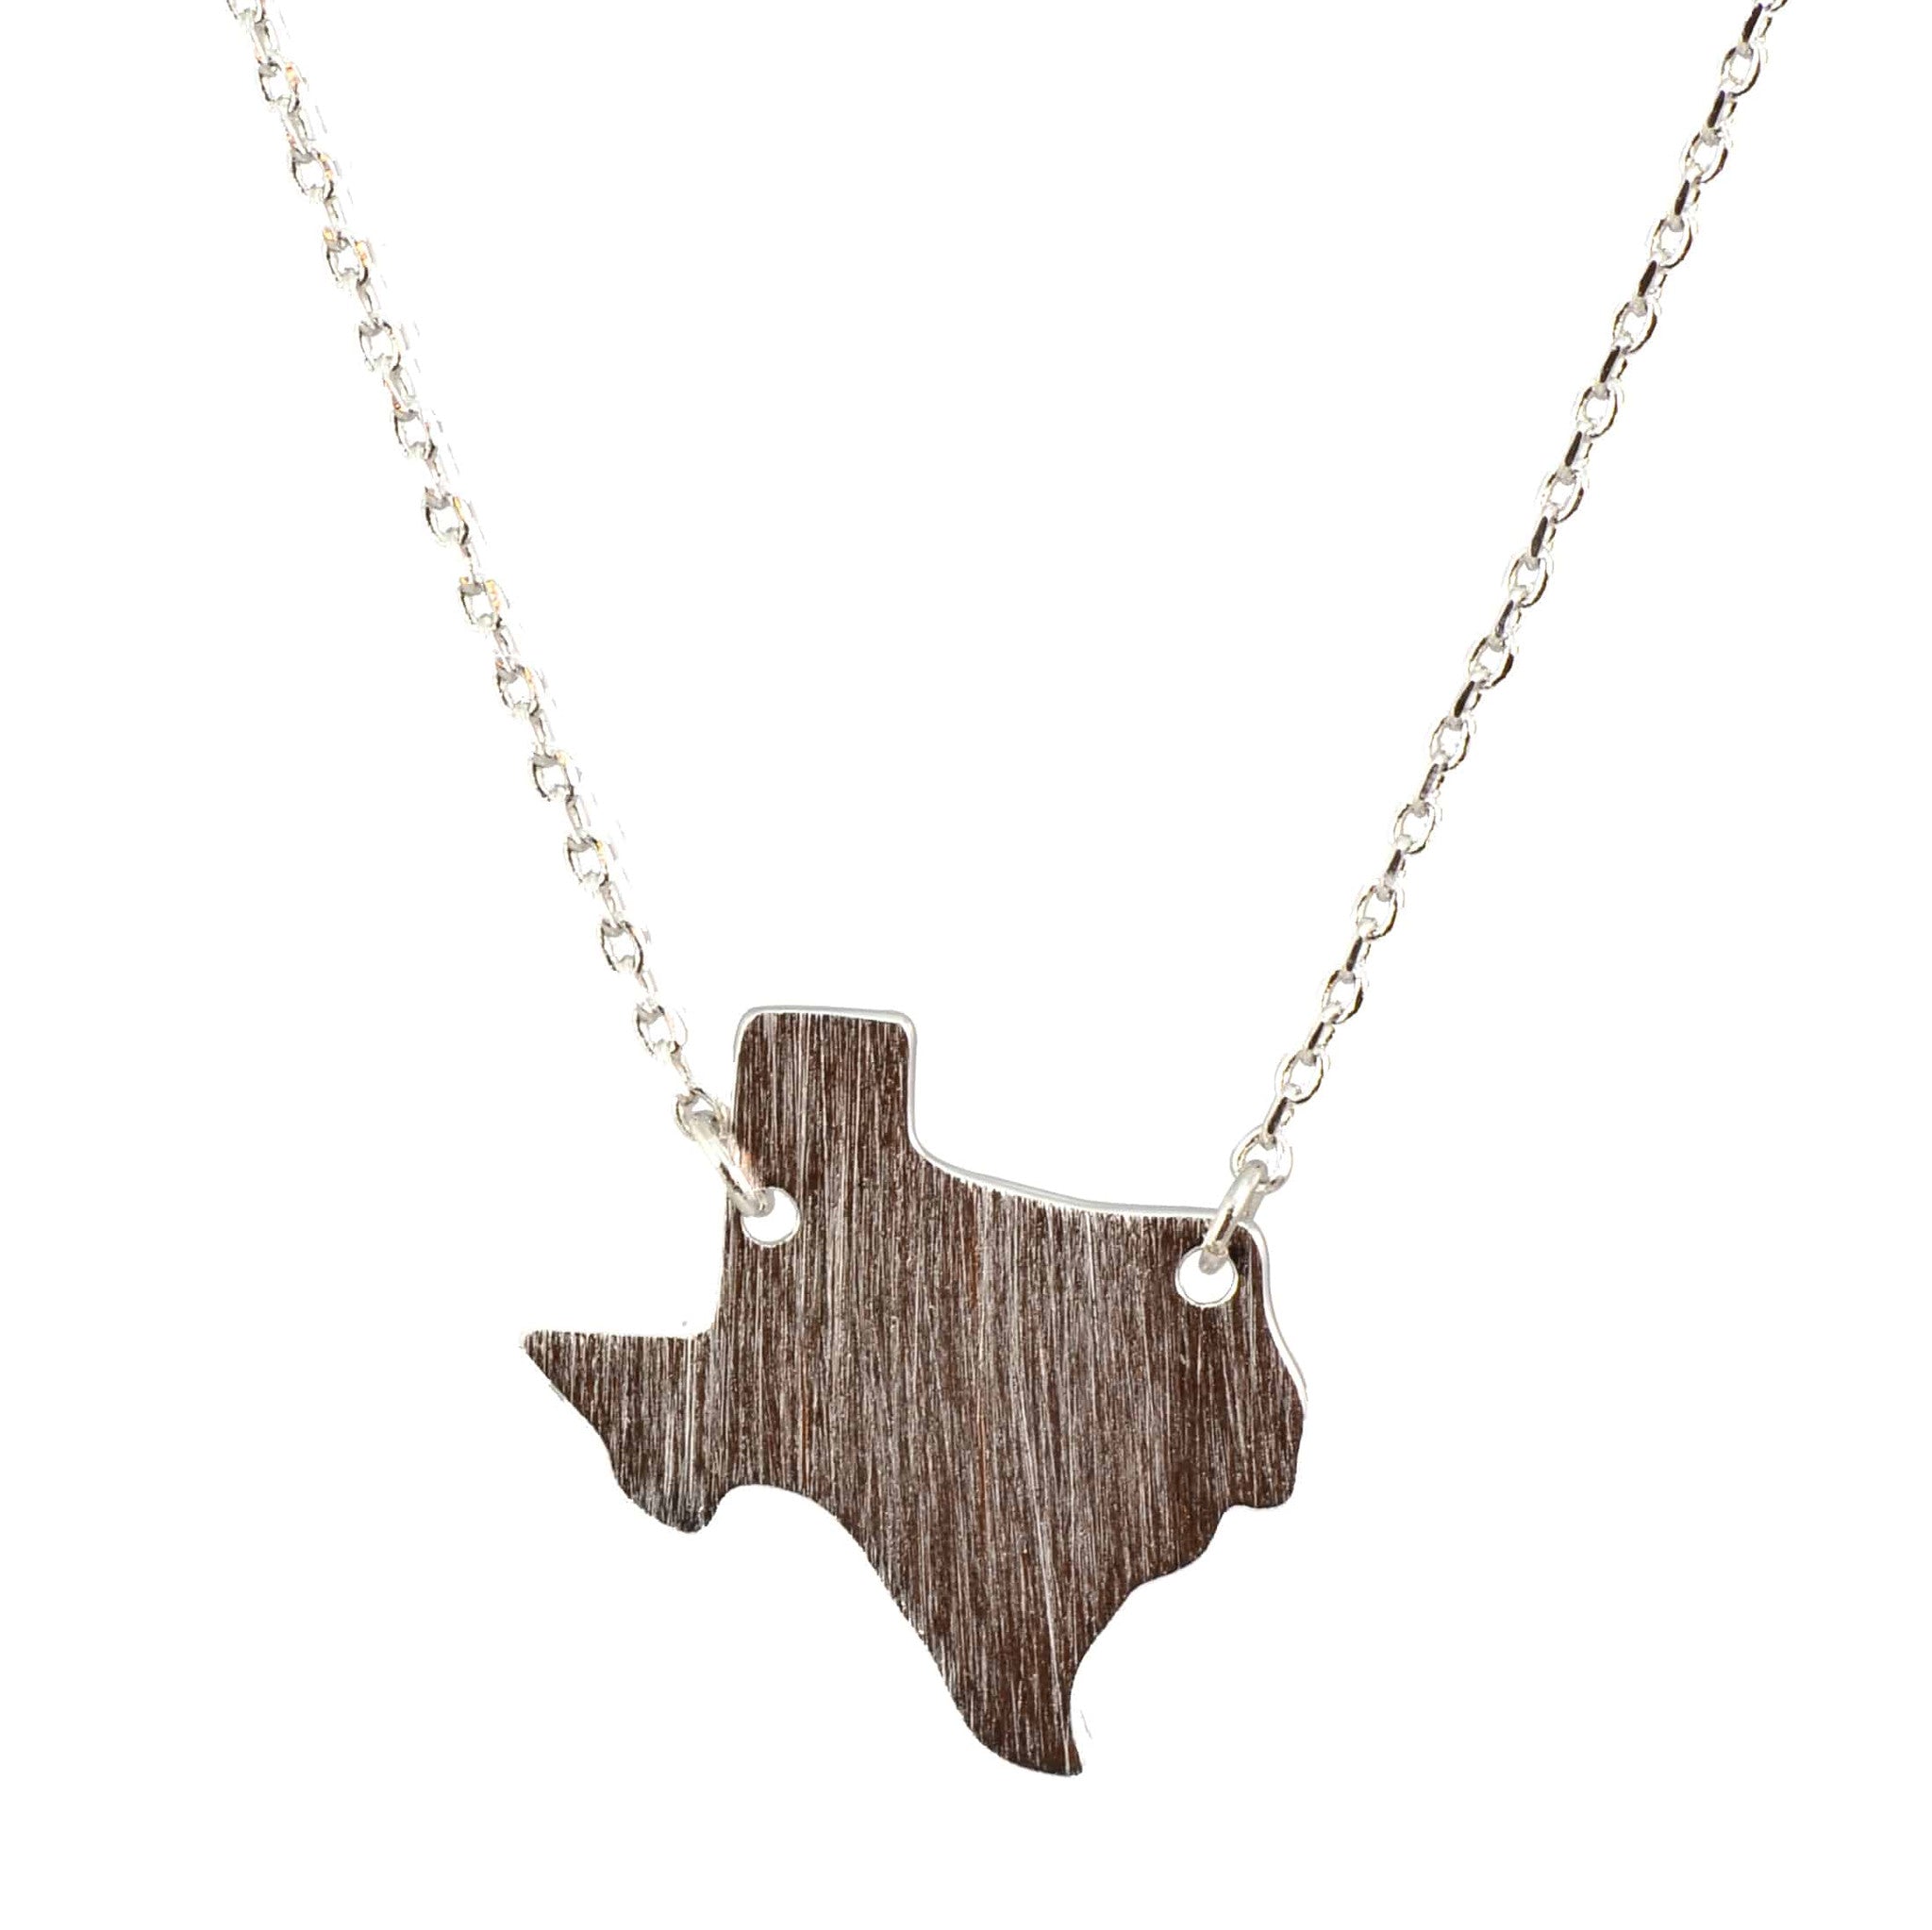 Enreverie Necklace, Silver Plated I Love Texas Pendant